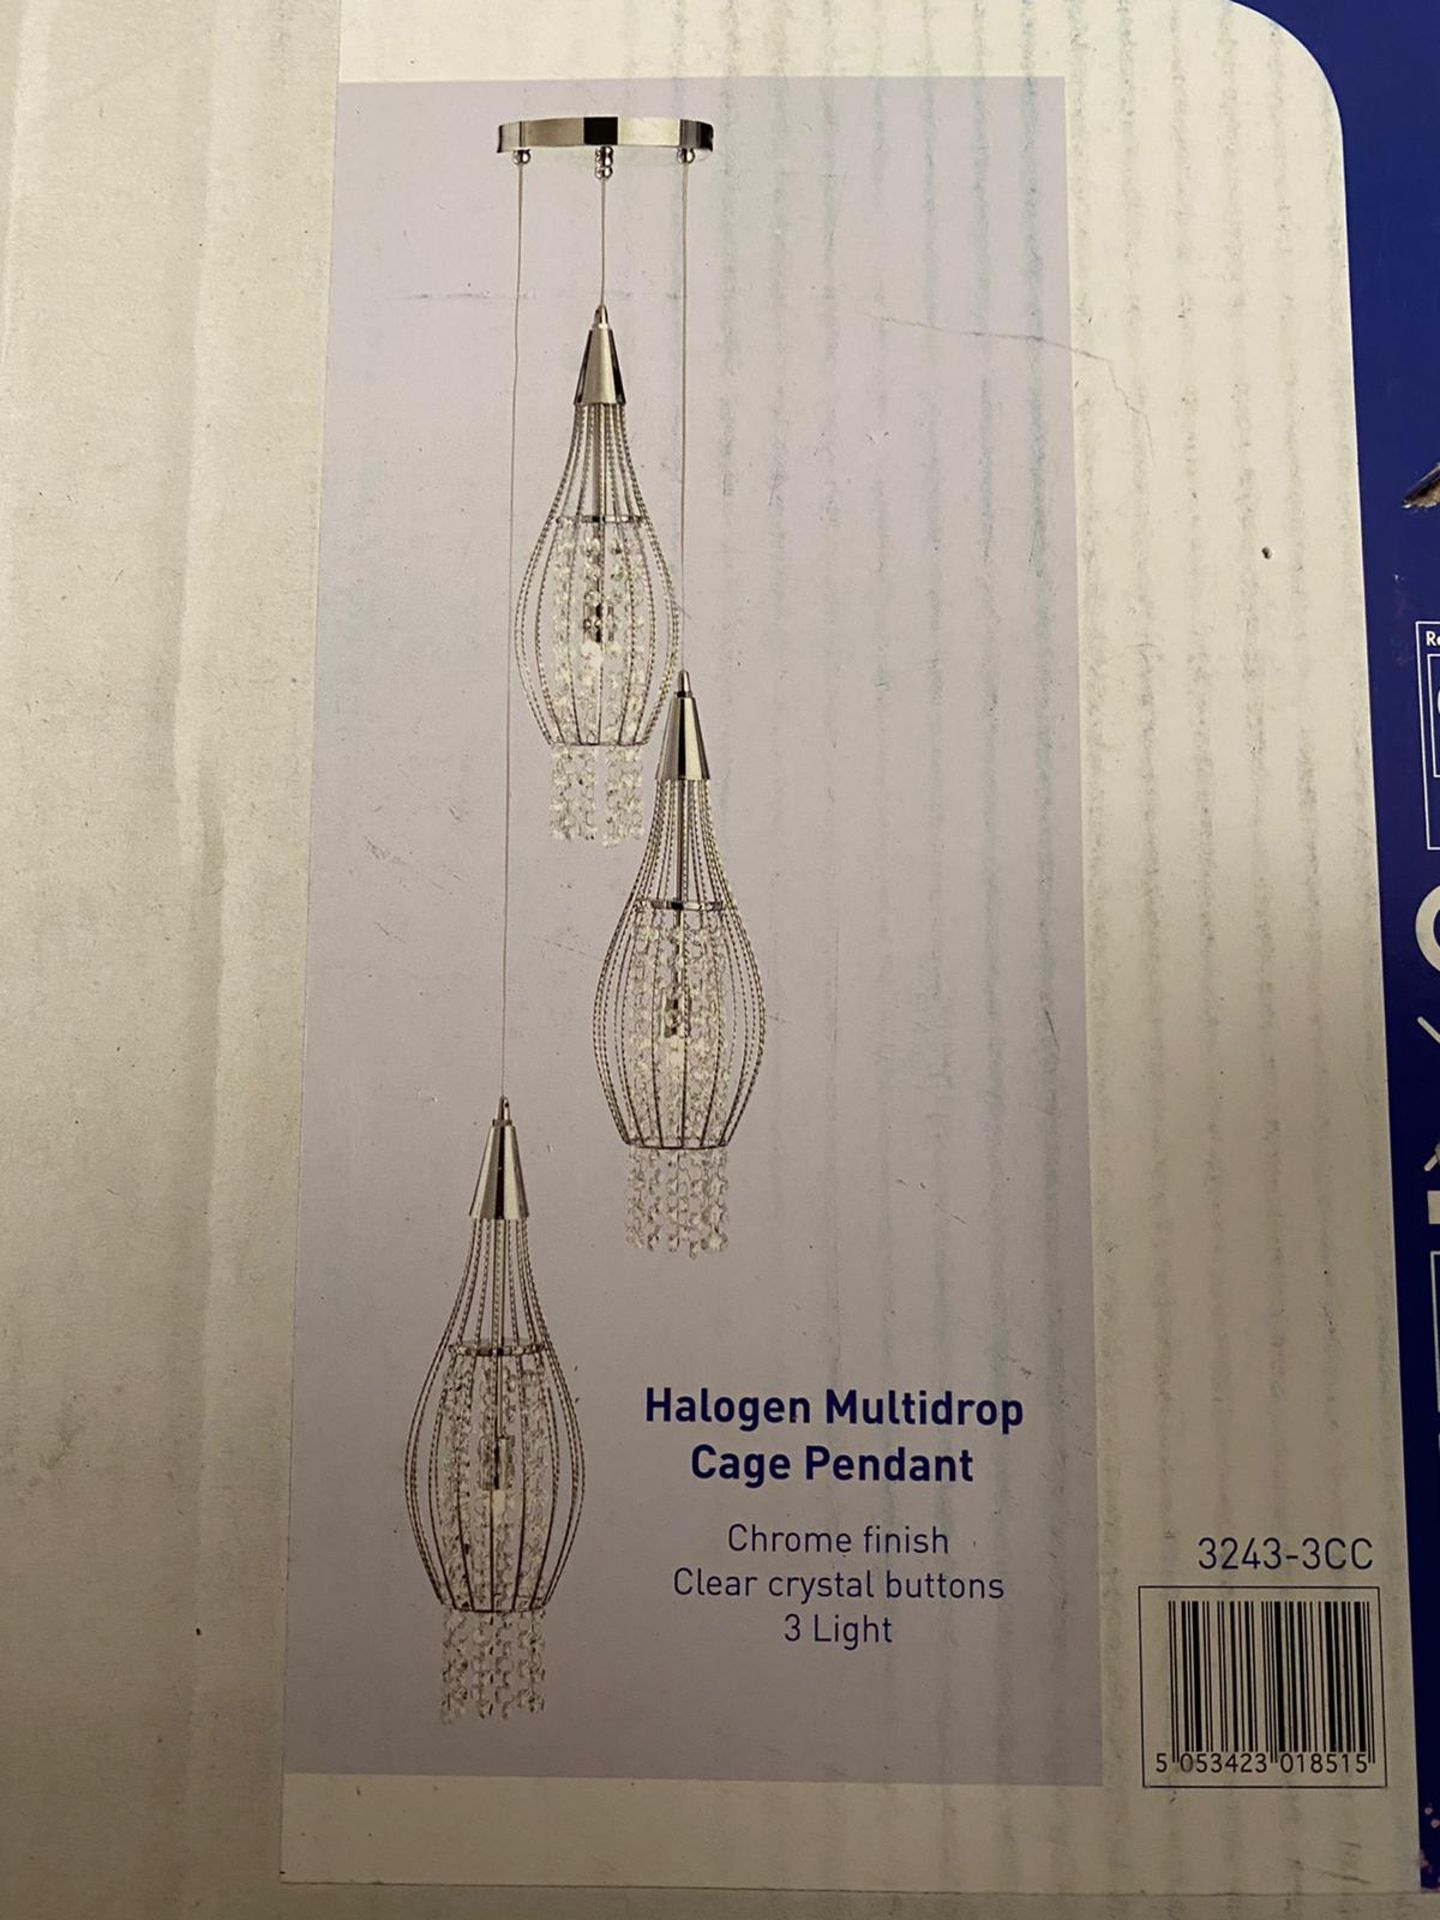 1 x Searchlight Halogen Multidrop Cage Pendant in chrome - Ref: 3243-3CC - New and Boxed - RRP: £240 - Image 2 of 4